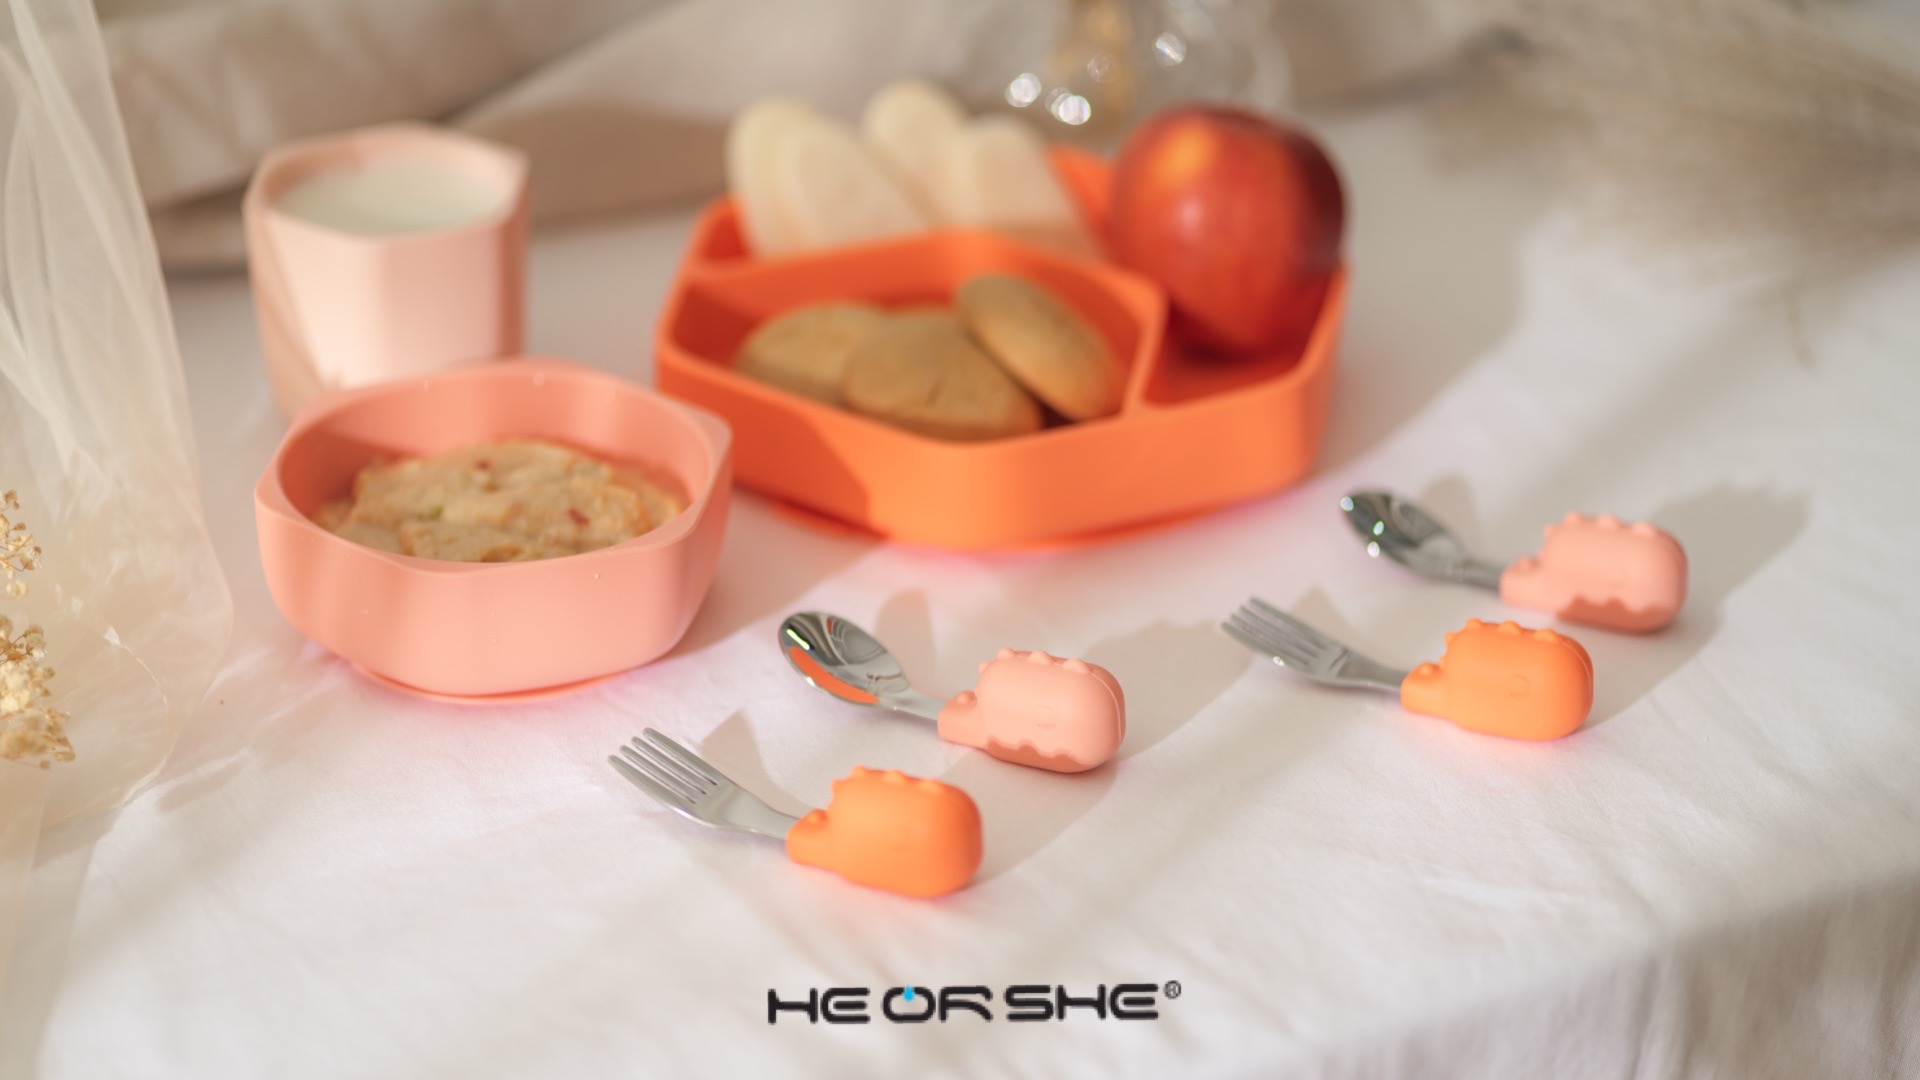 HE OR SHE Stainless Steel Spoon & Fork Set - Coral / Blue